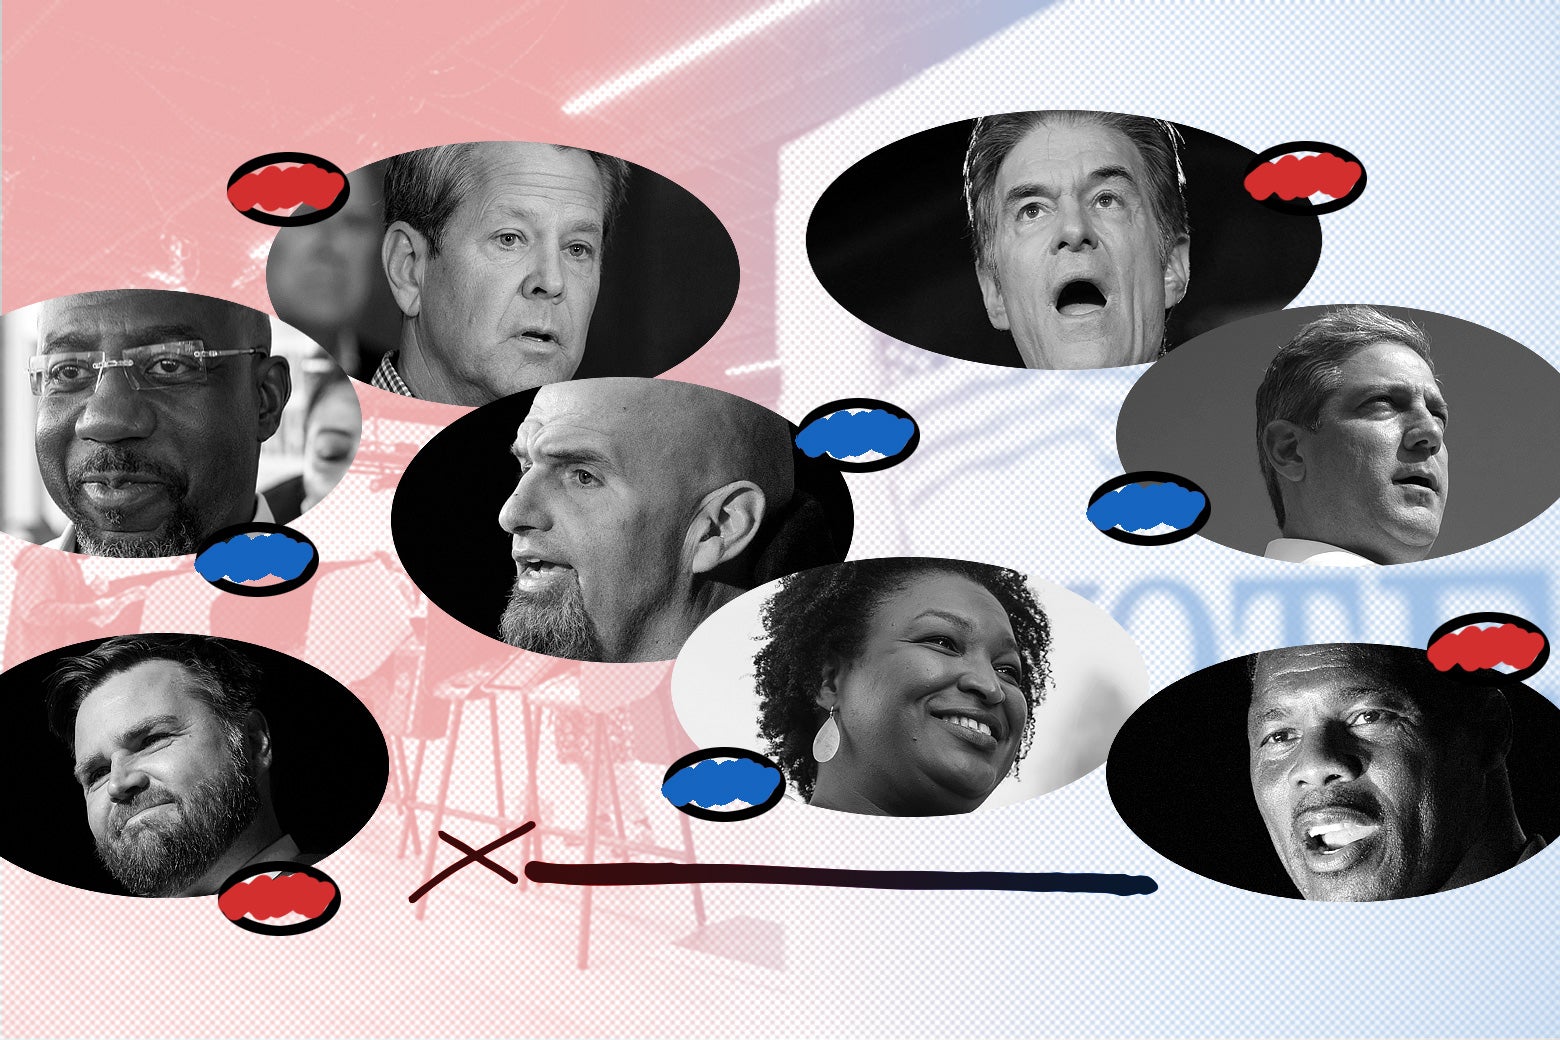 An illustration featuring the faces of many prominent candidates running in the 2022 midterms election.